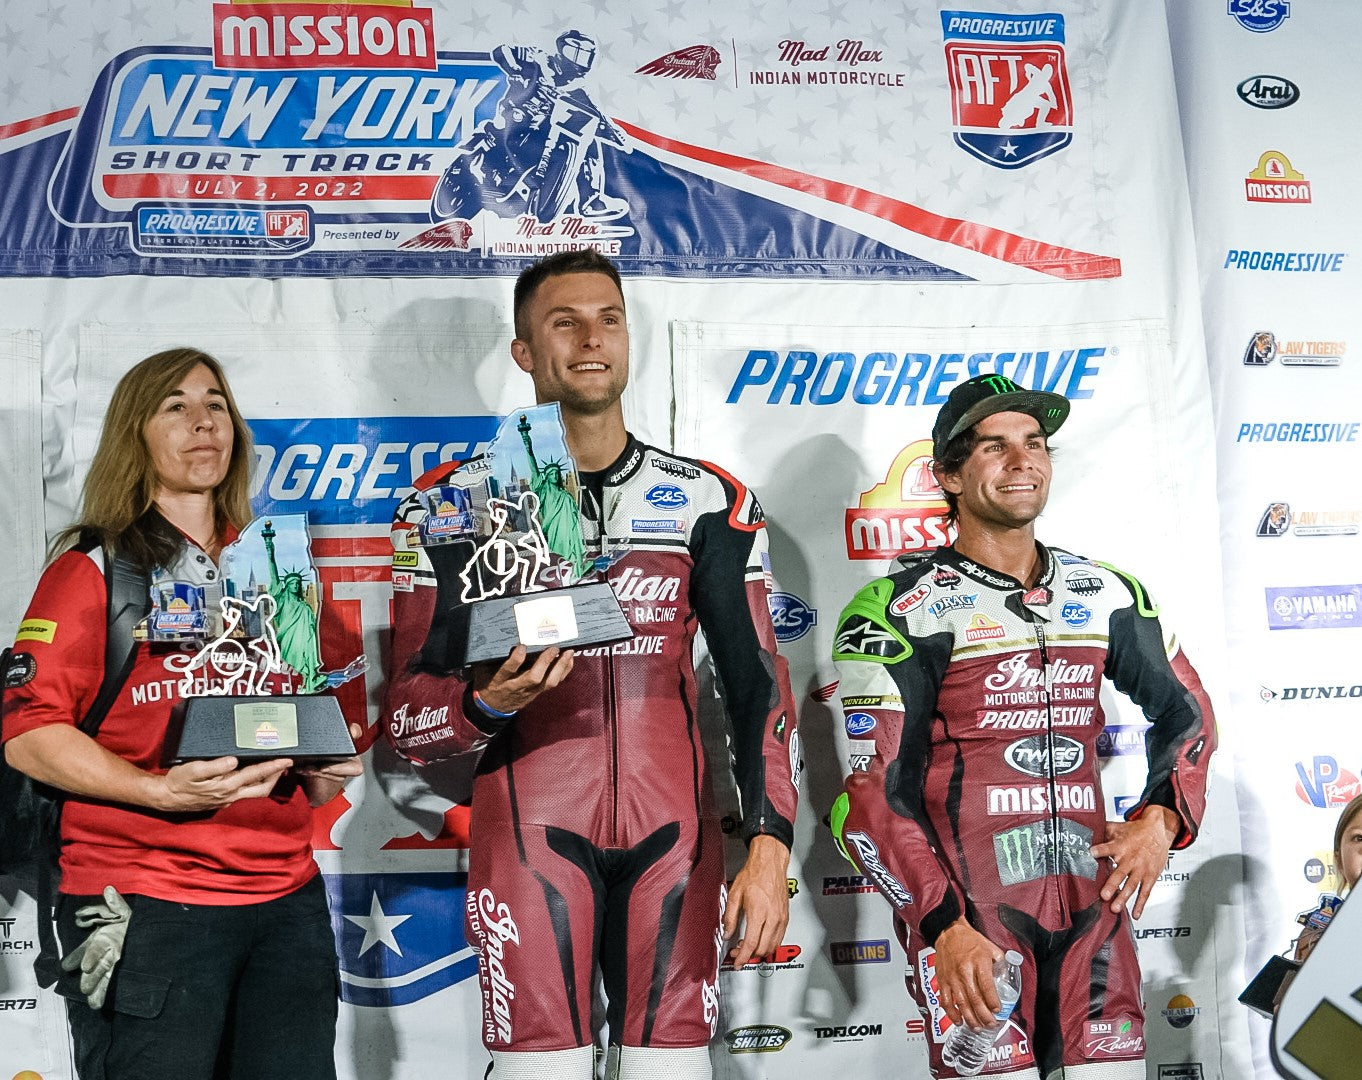 ANOTHER DOMINANT NIGHT FOR ALPINESTARS IN AMERICAN FLAT TRACK RACING AS BRIAR BAUMAN, CORY ALEXANDER AND KODY KOPP ALL WIN MAIN EVENTS IN WEEDSPORT, NEW YORK